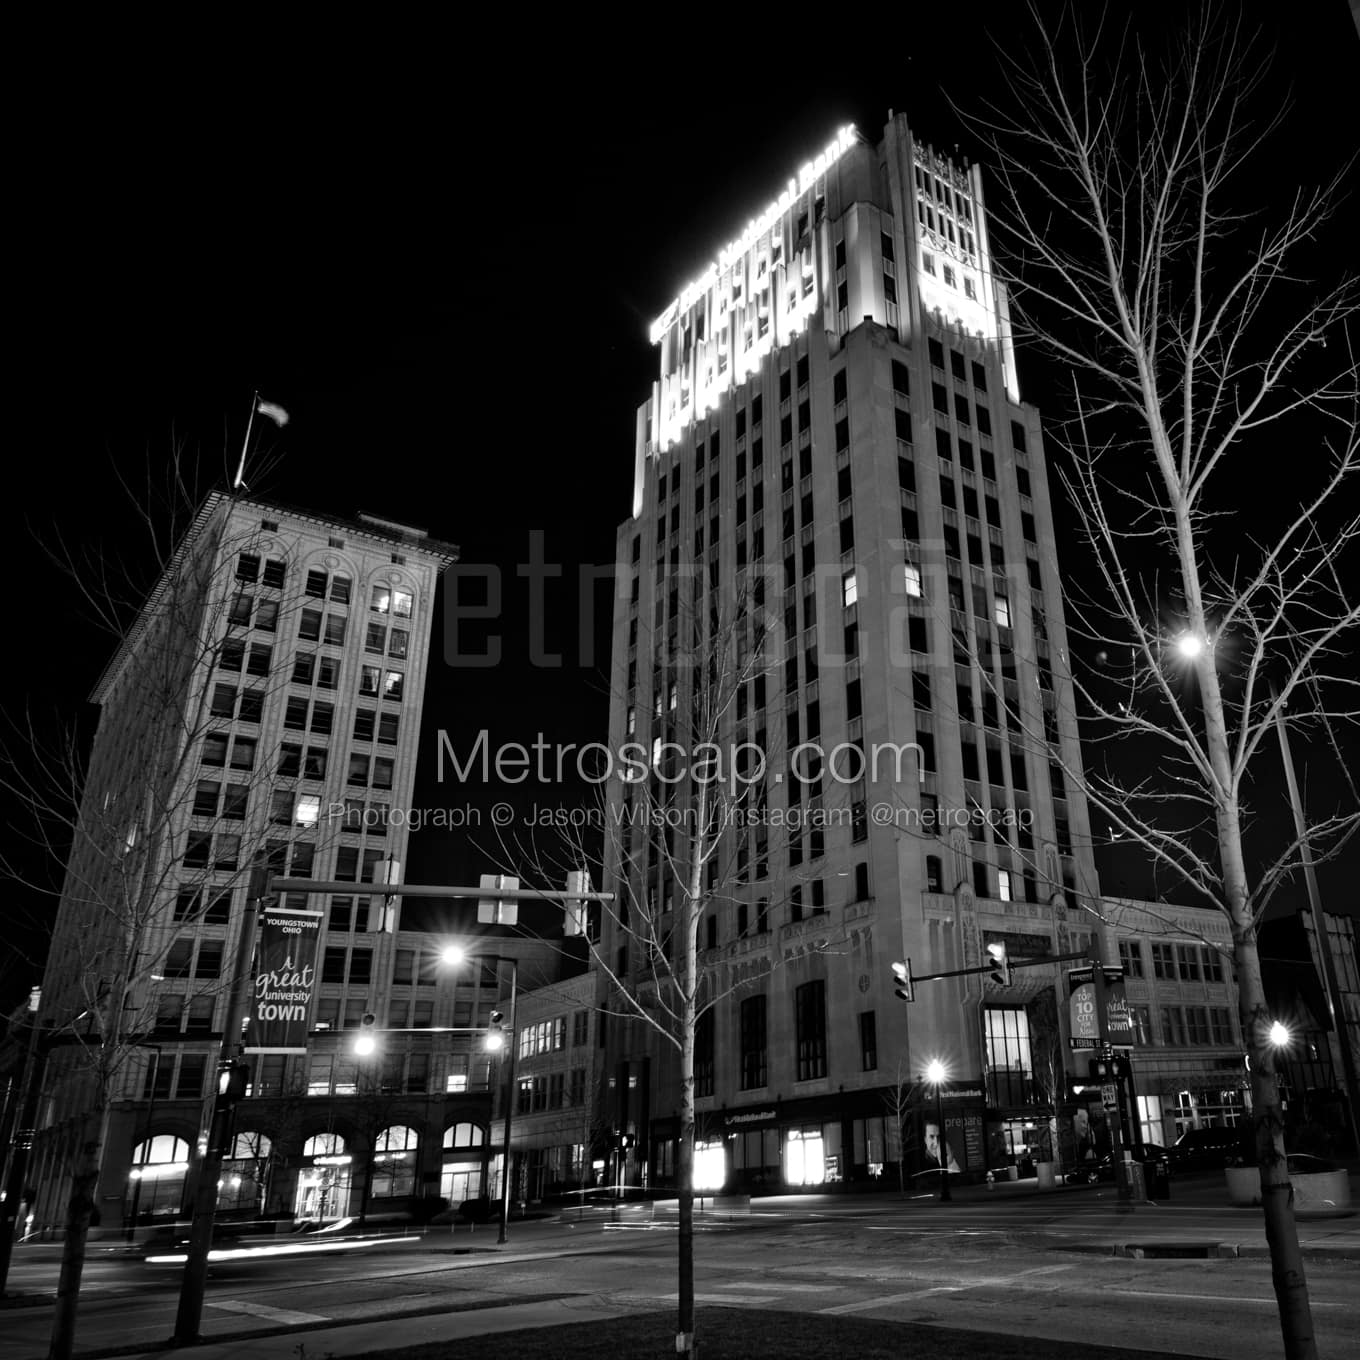 Youngstown Black & White Landscape Photography